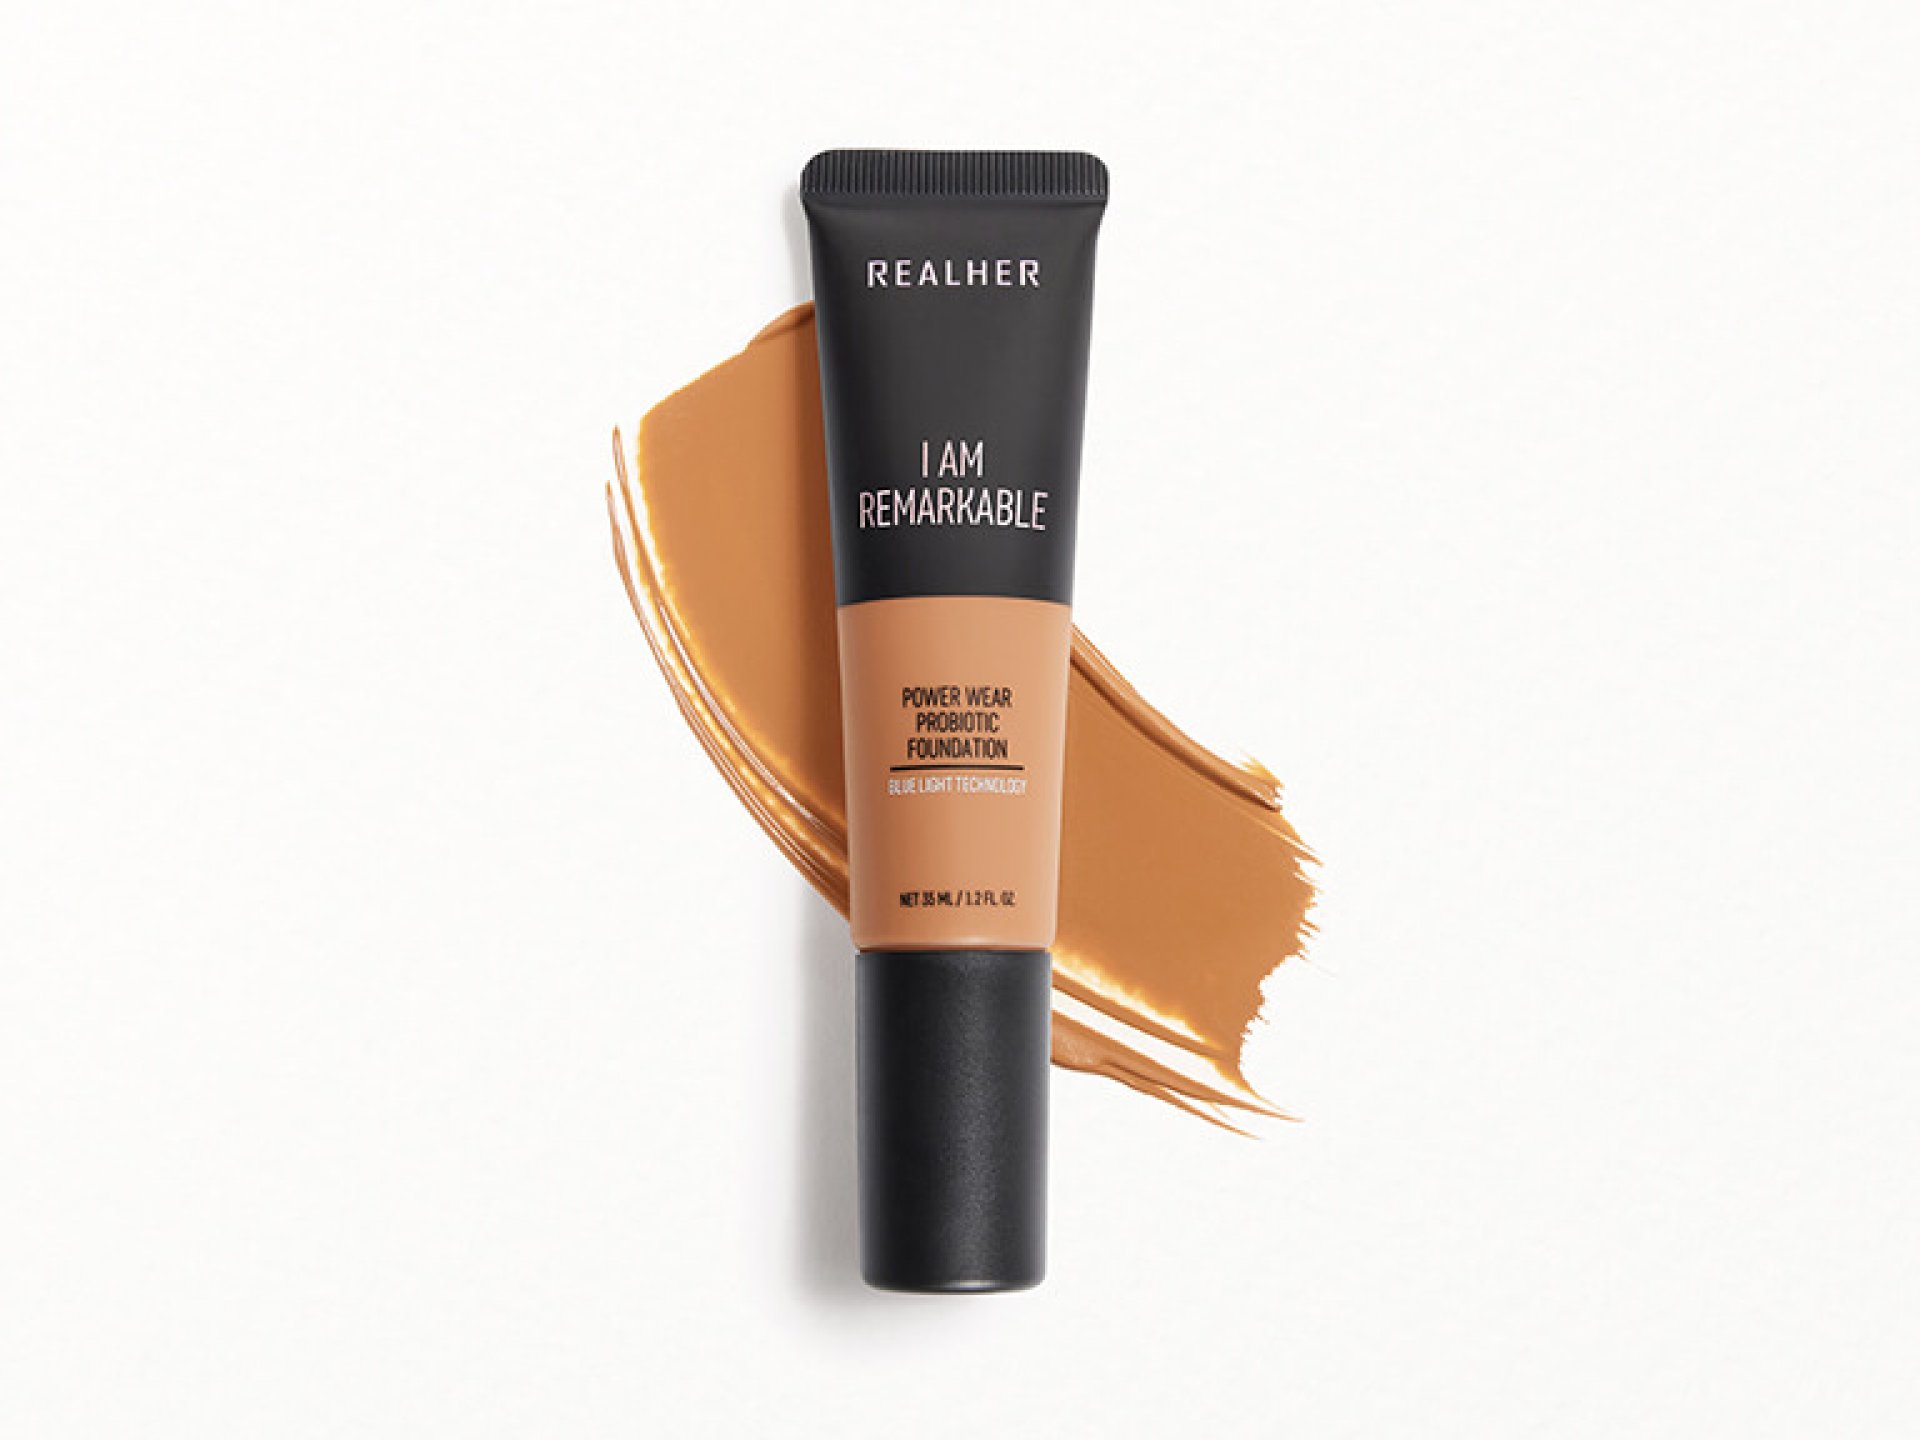 REALHER Power Wear Probiotic Foundation in I Am Remarkable